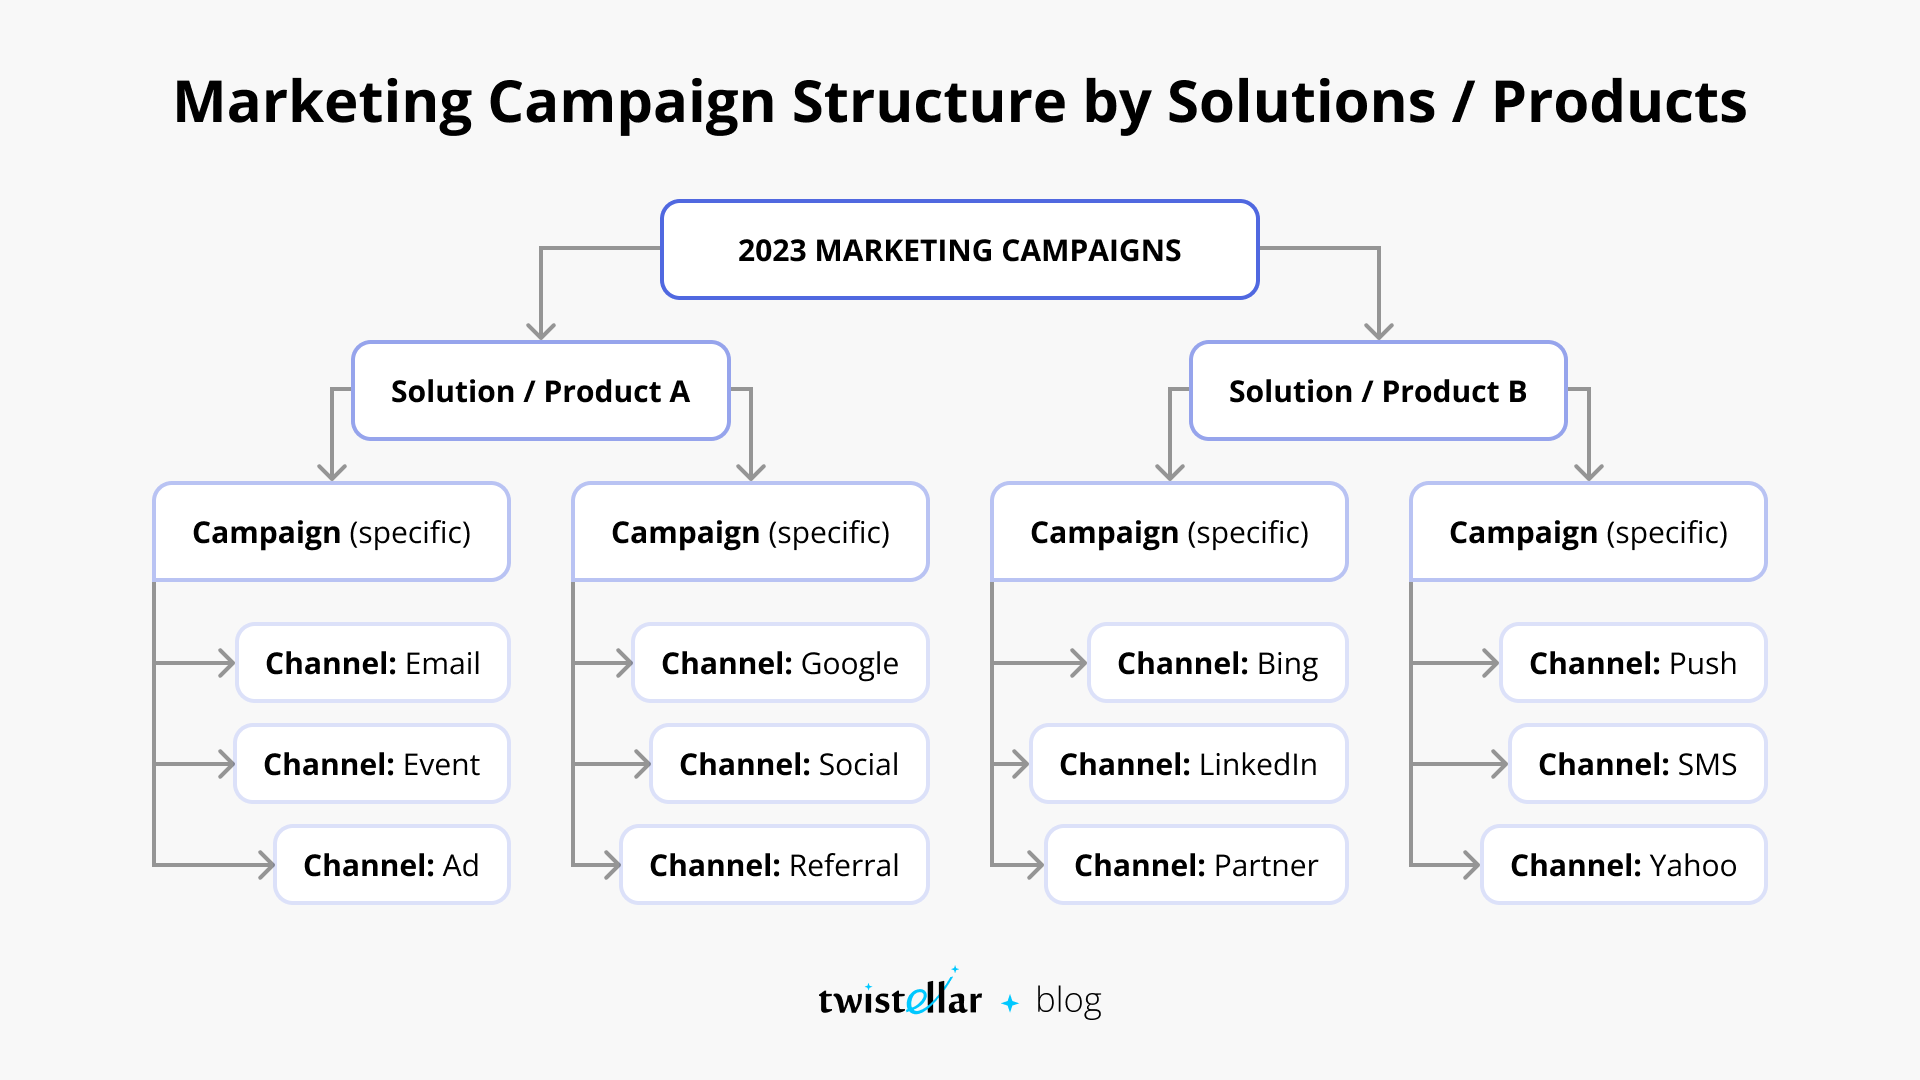 Marketing Campaign Structure by Solutions/Products